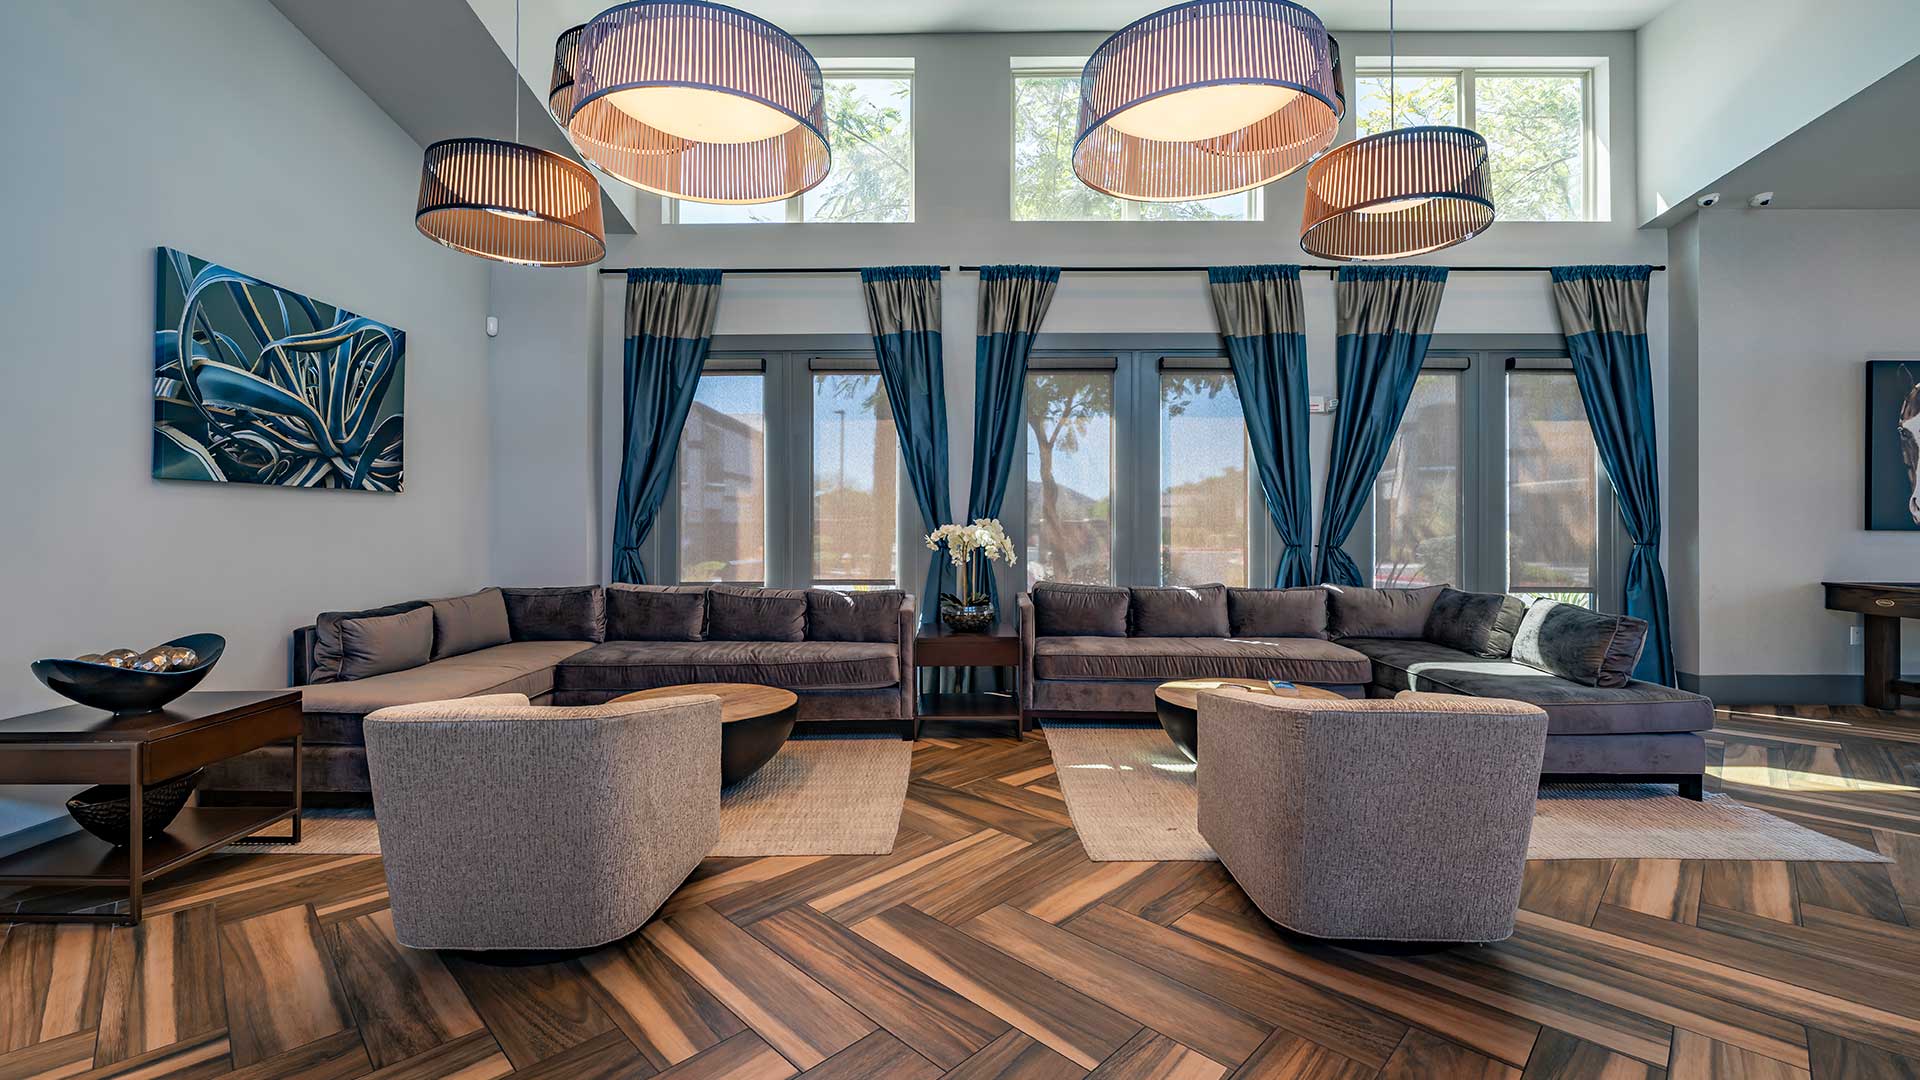 Modern living room featuring dark brown sofas, gray armchairs, wooden herringbone floor, large windows with curtains, and contemporary light fixtures.